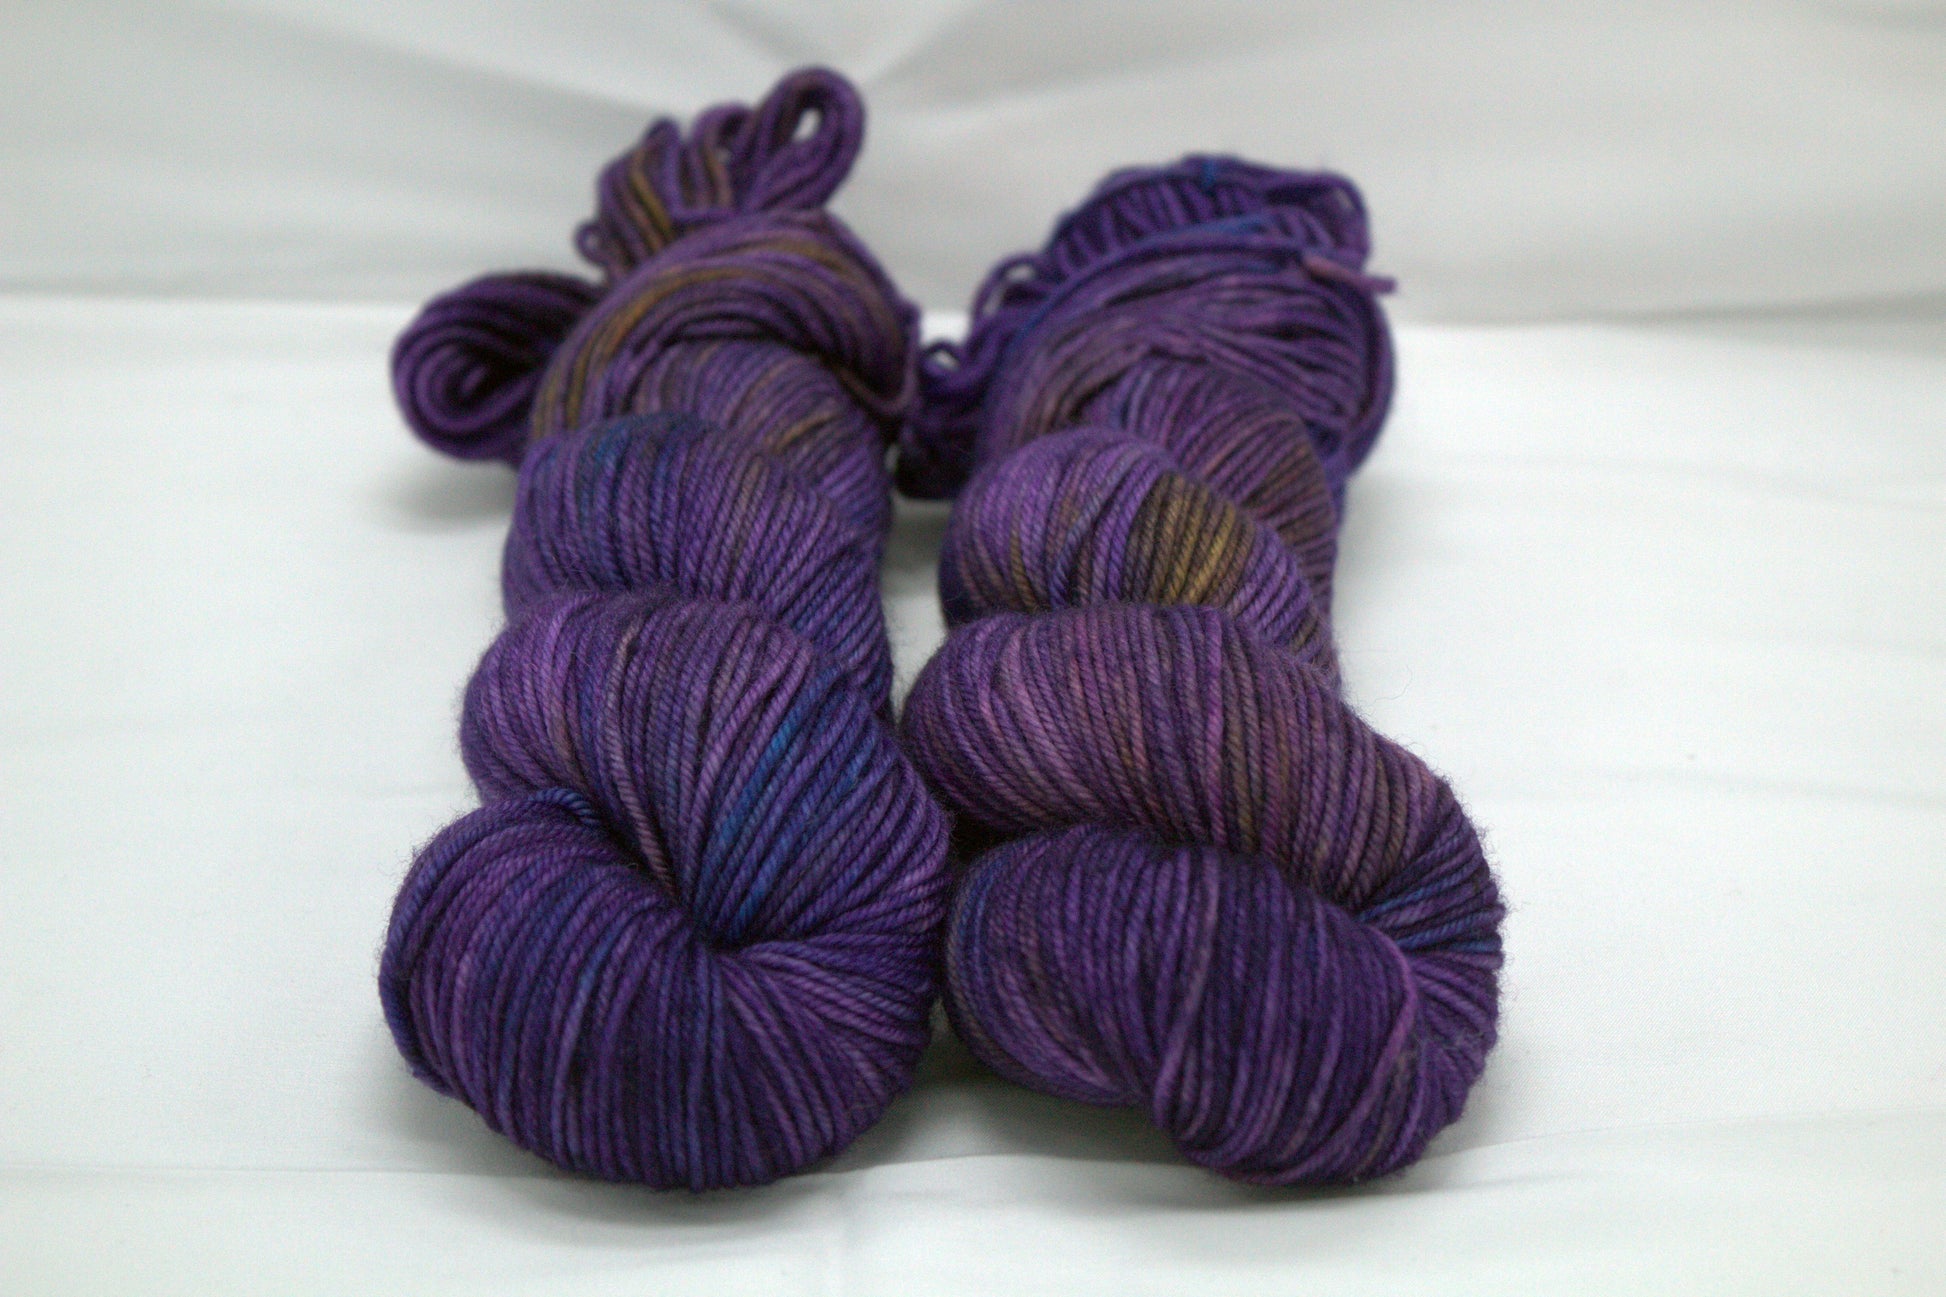 two twisted skeins variegated purple yarn on white background.